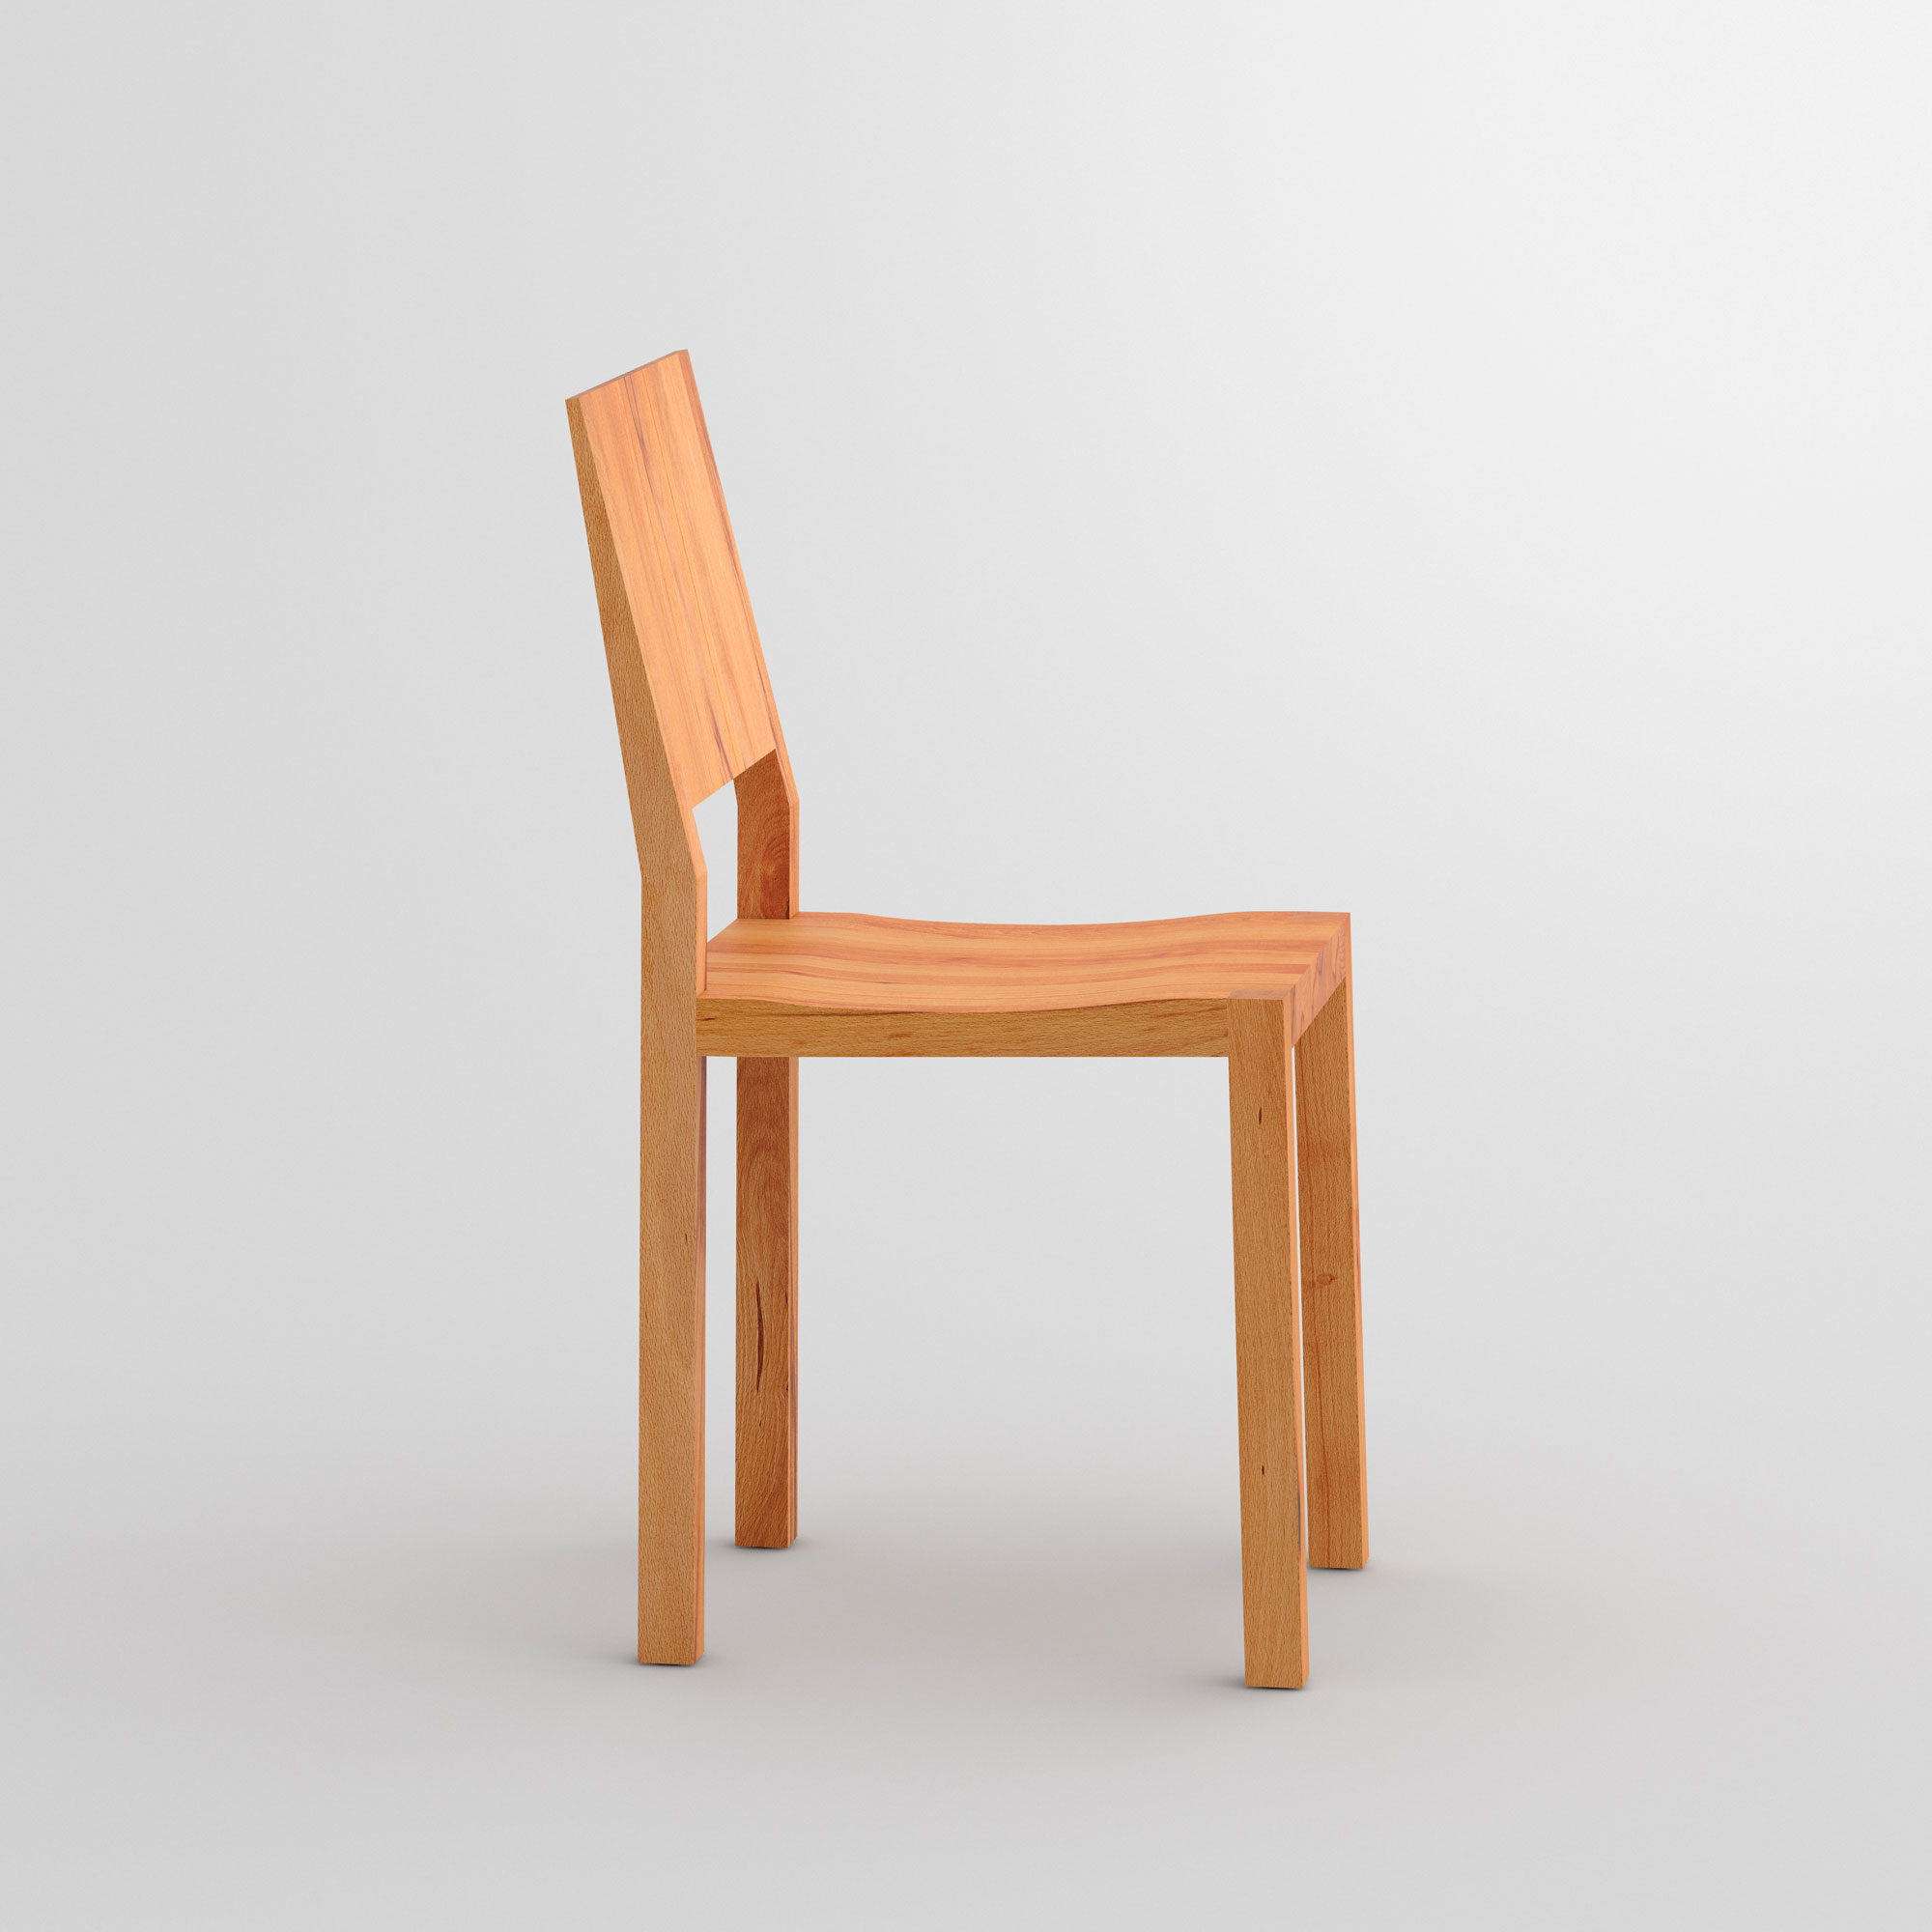 Solid Wood Chair TAU cam4 custom made in solid wood by vitamin design